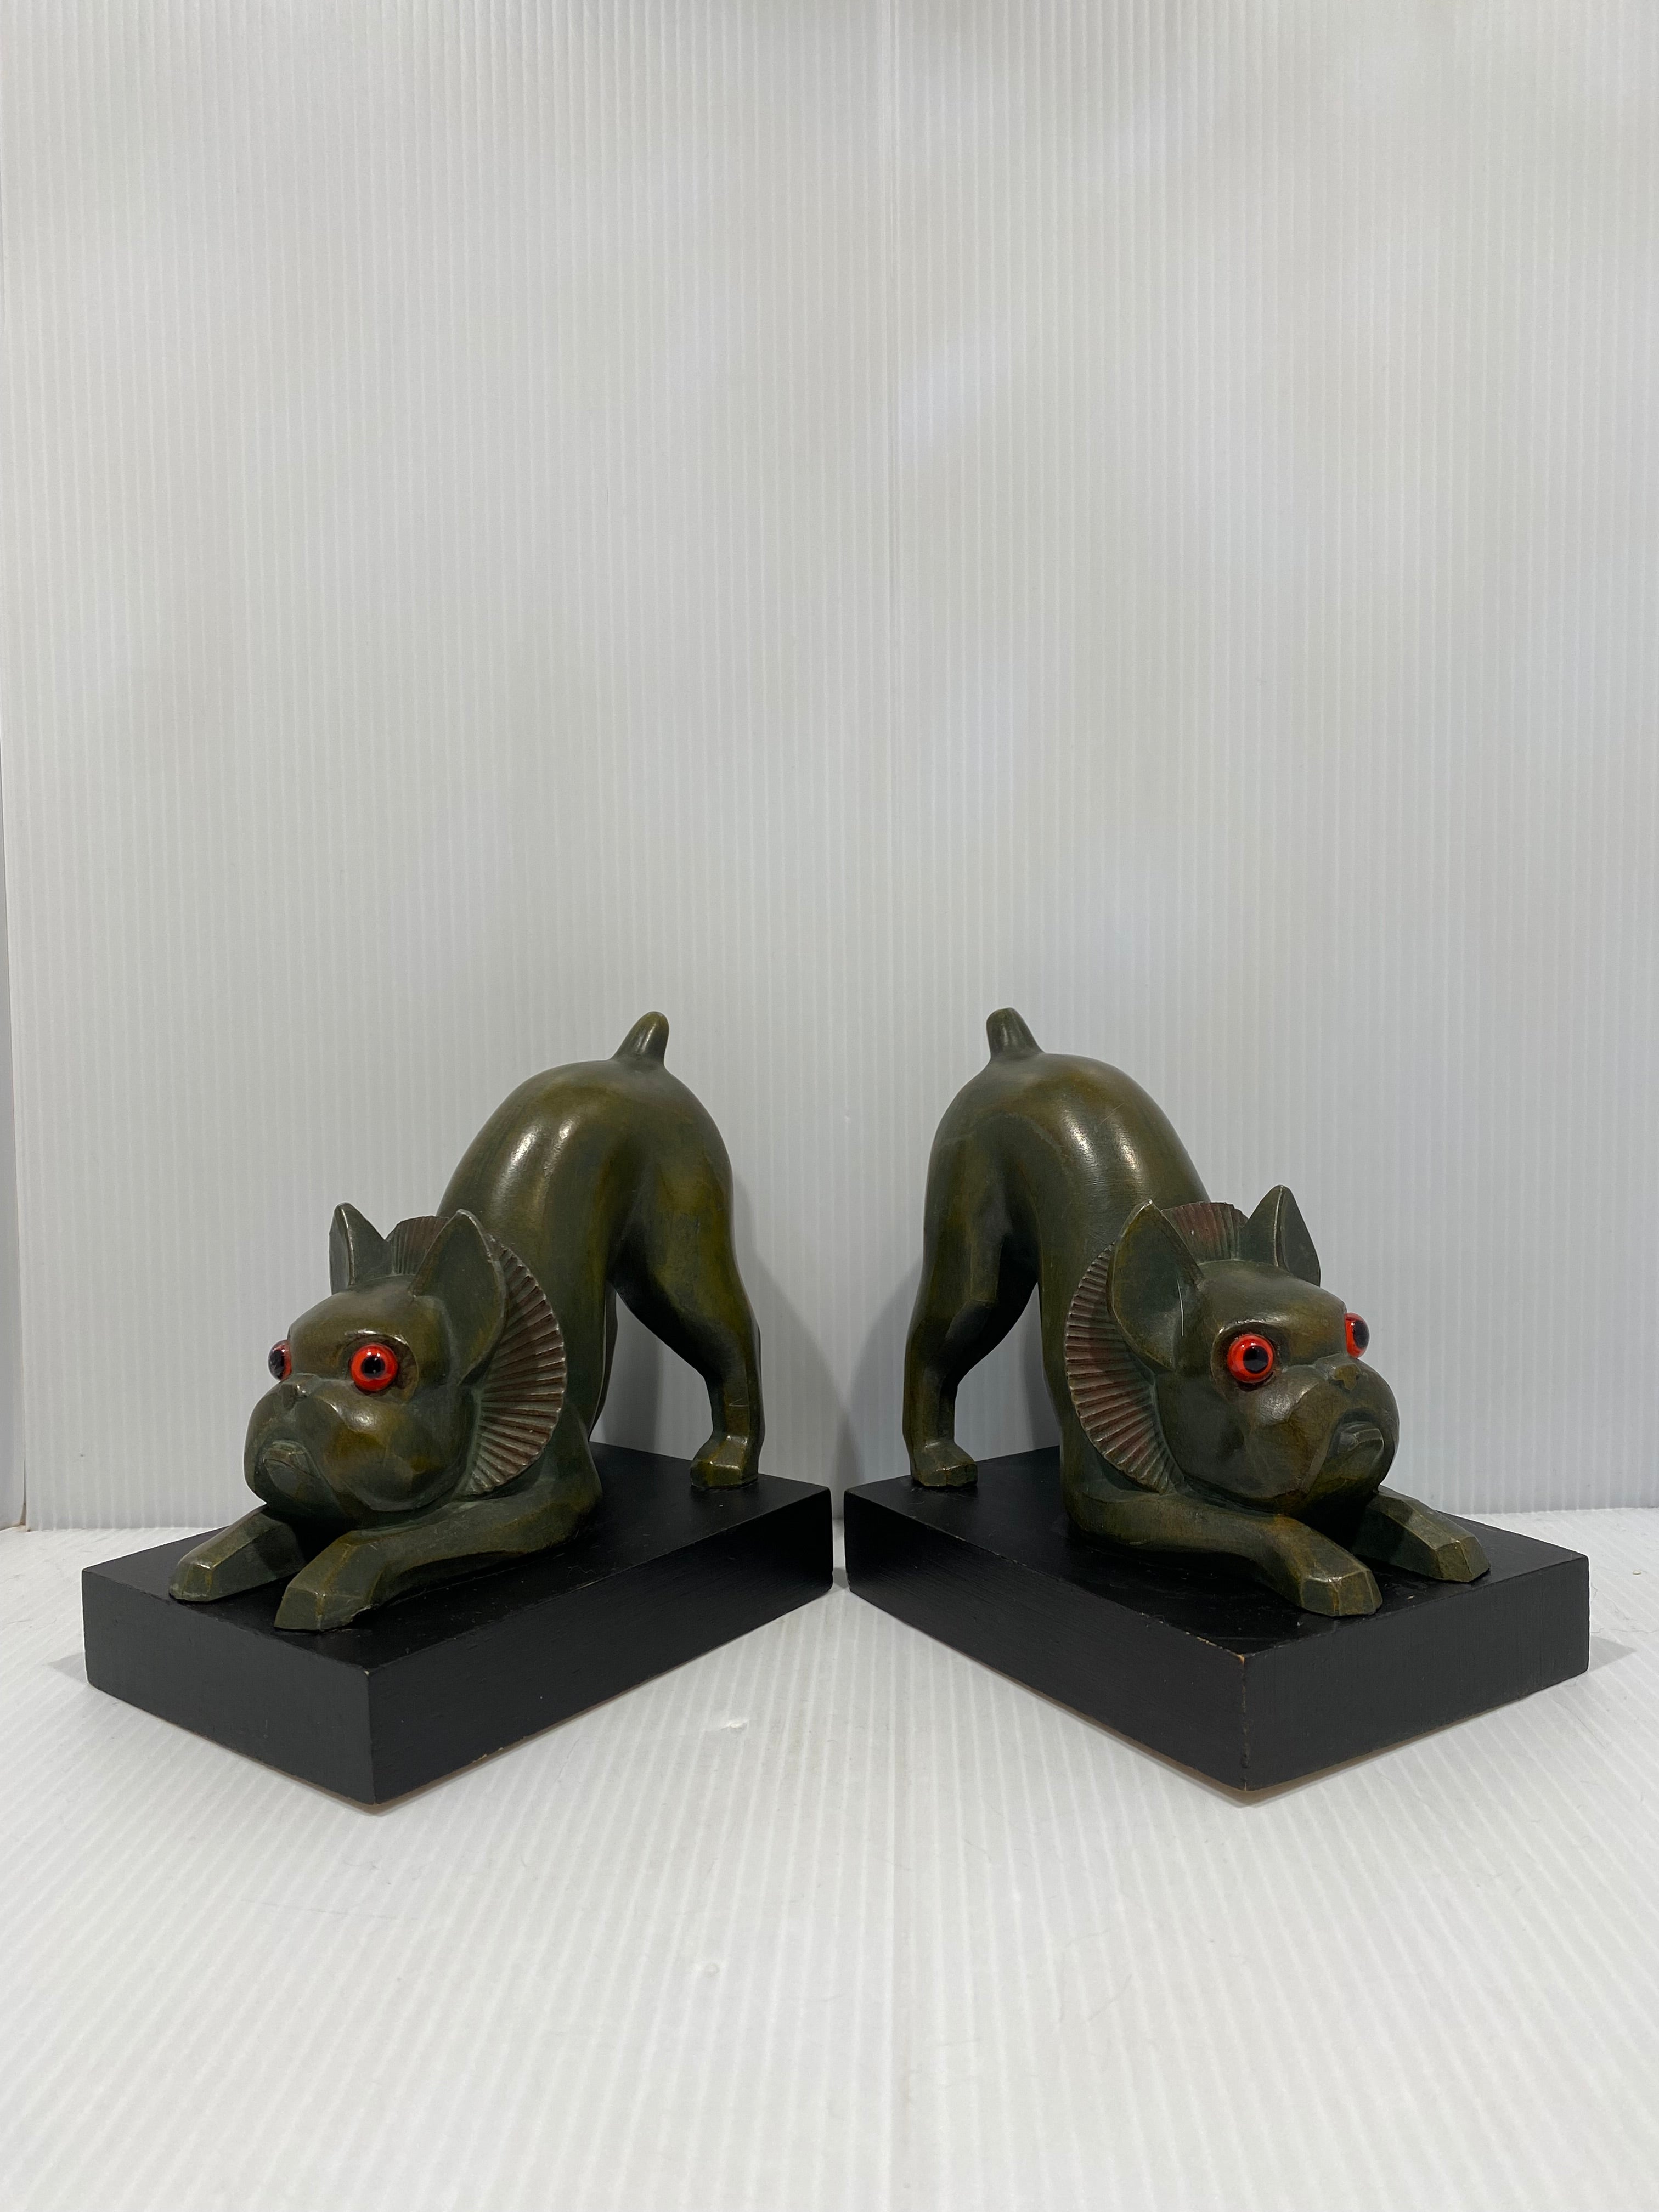 ART DECO FRENCH BULLDOG METAL BOOKENDS